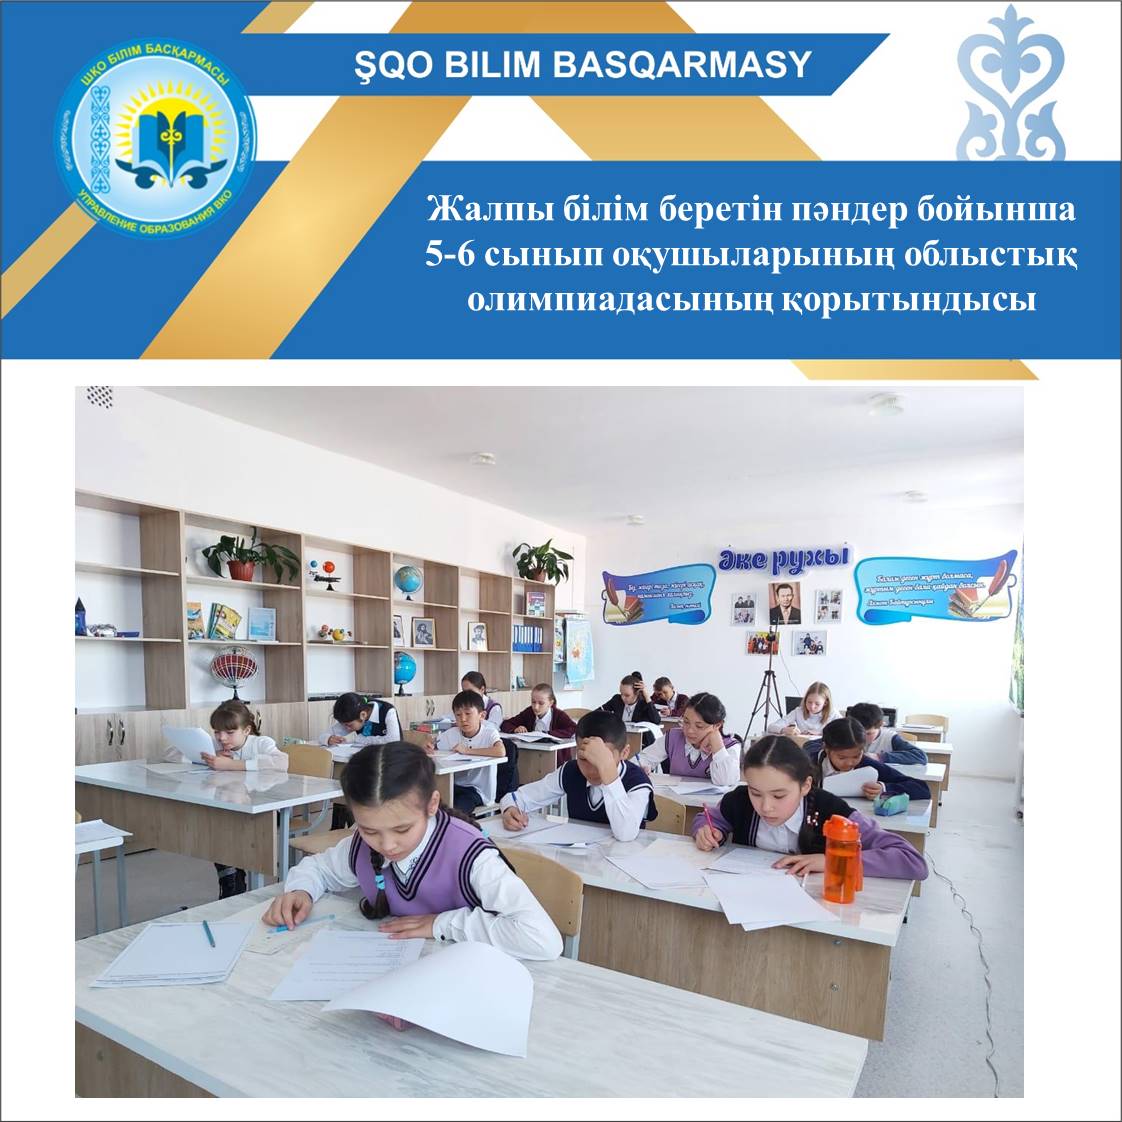 Results of Regional Olympiad in General Subjects among the 5th-6th graders